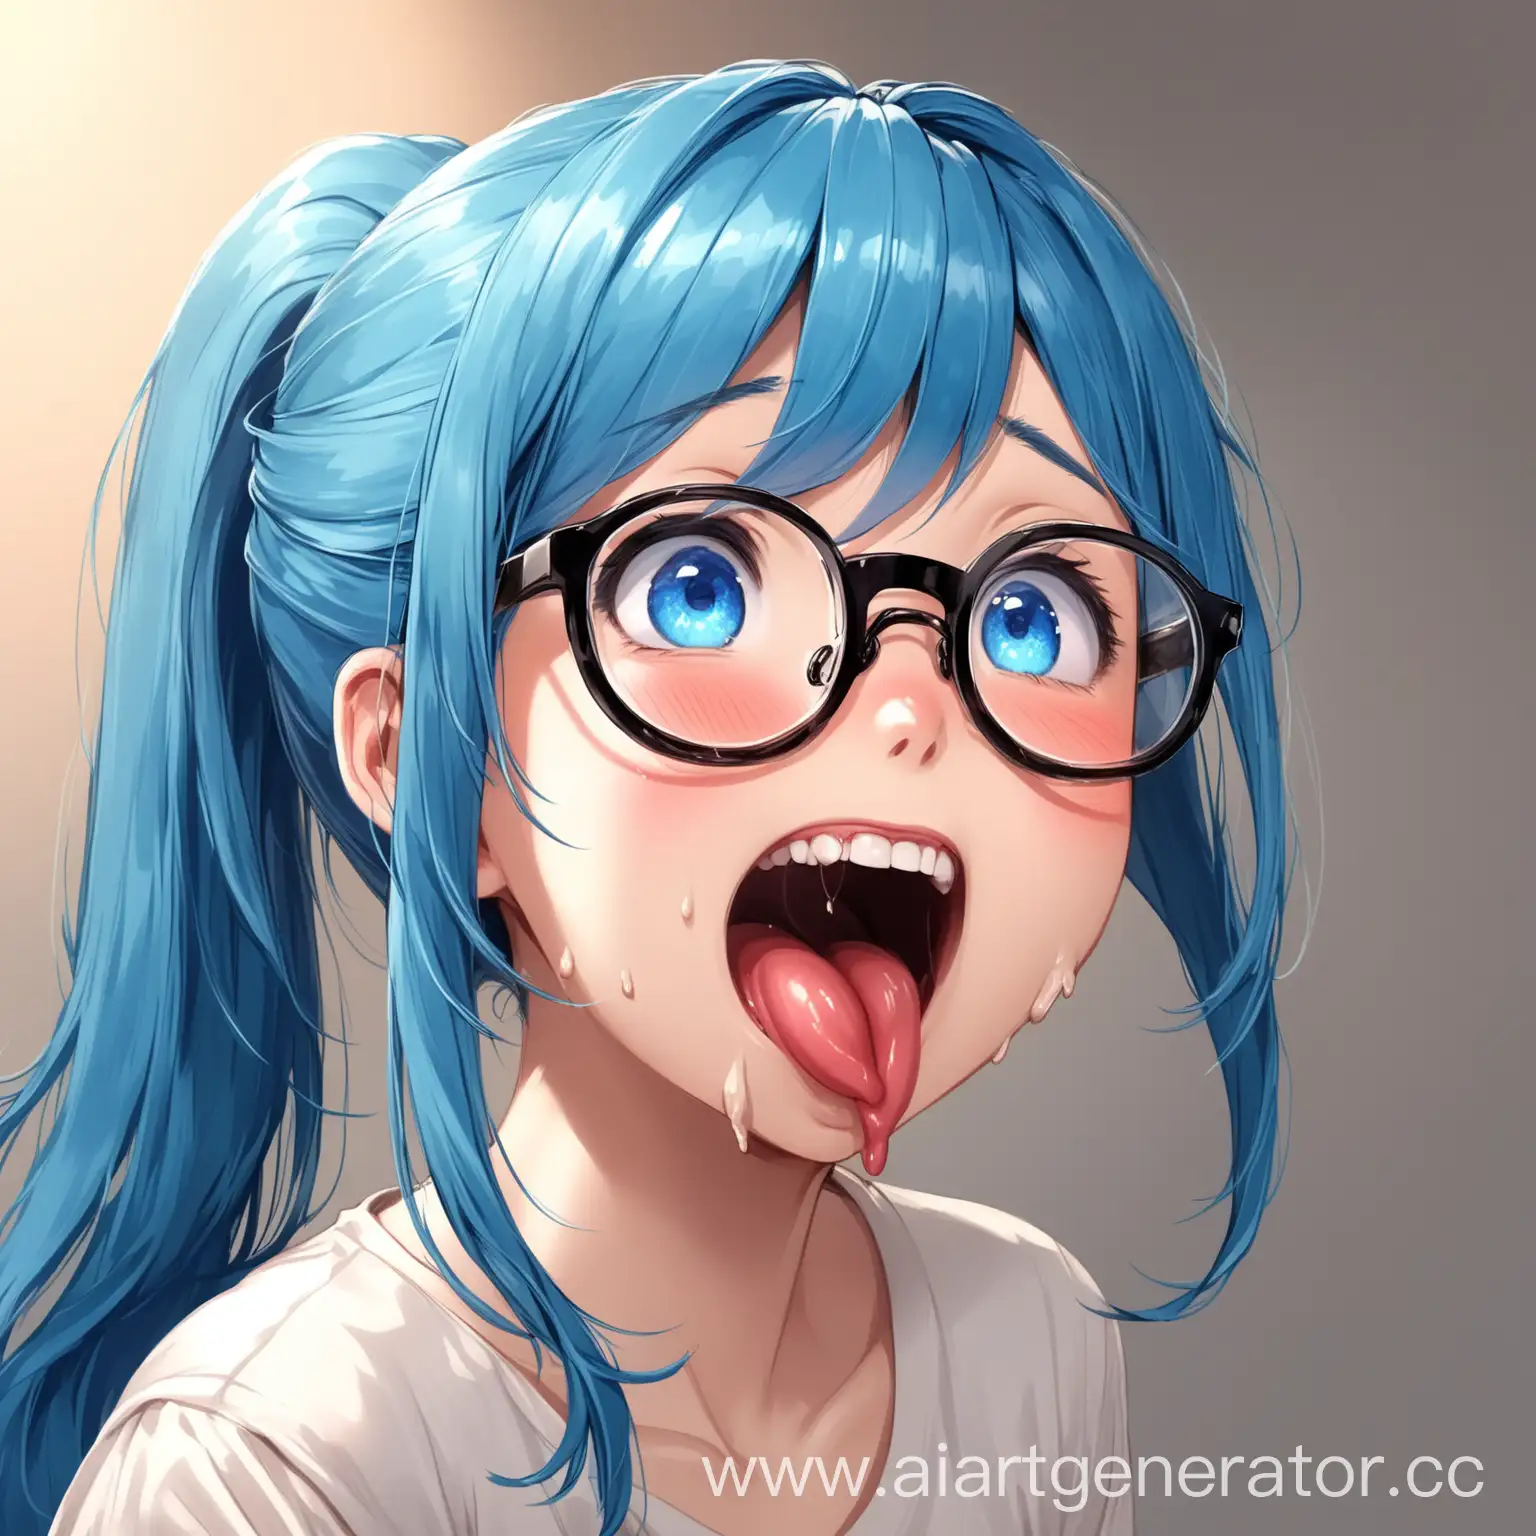 Excited-Girl-with-Blue-Hair-and-Glasses-Ponytail-Hairstyle